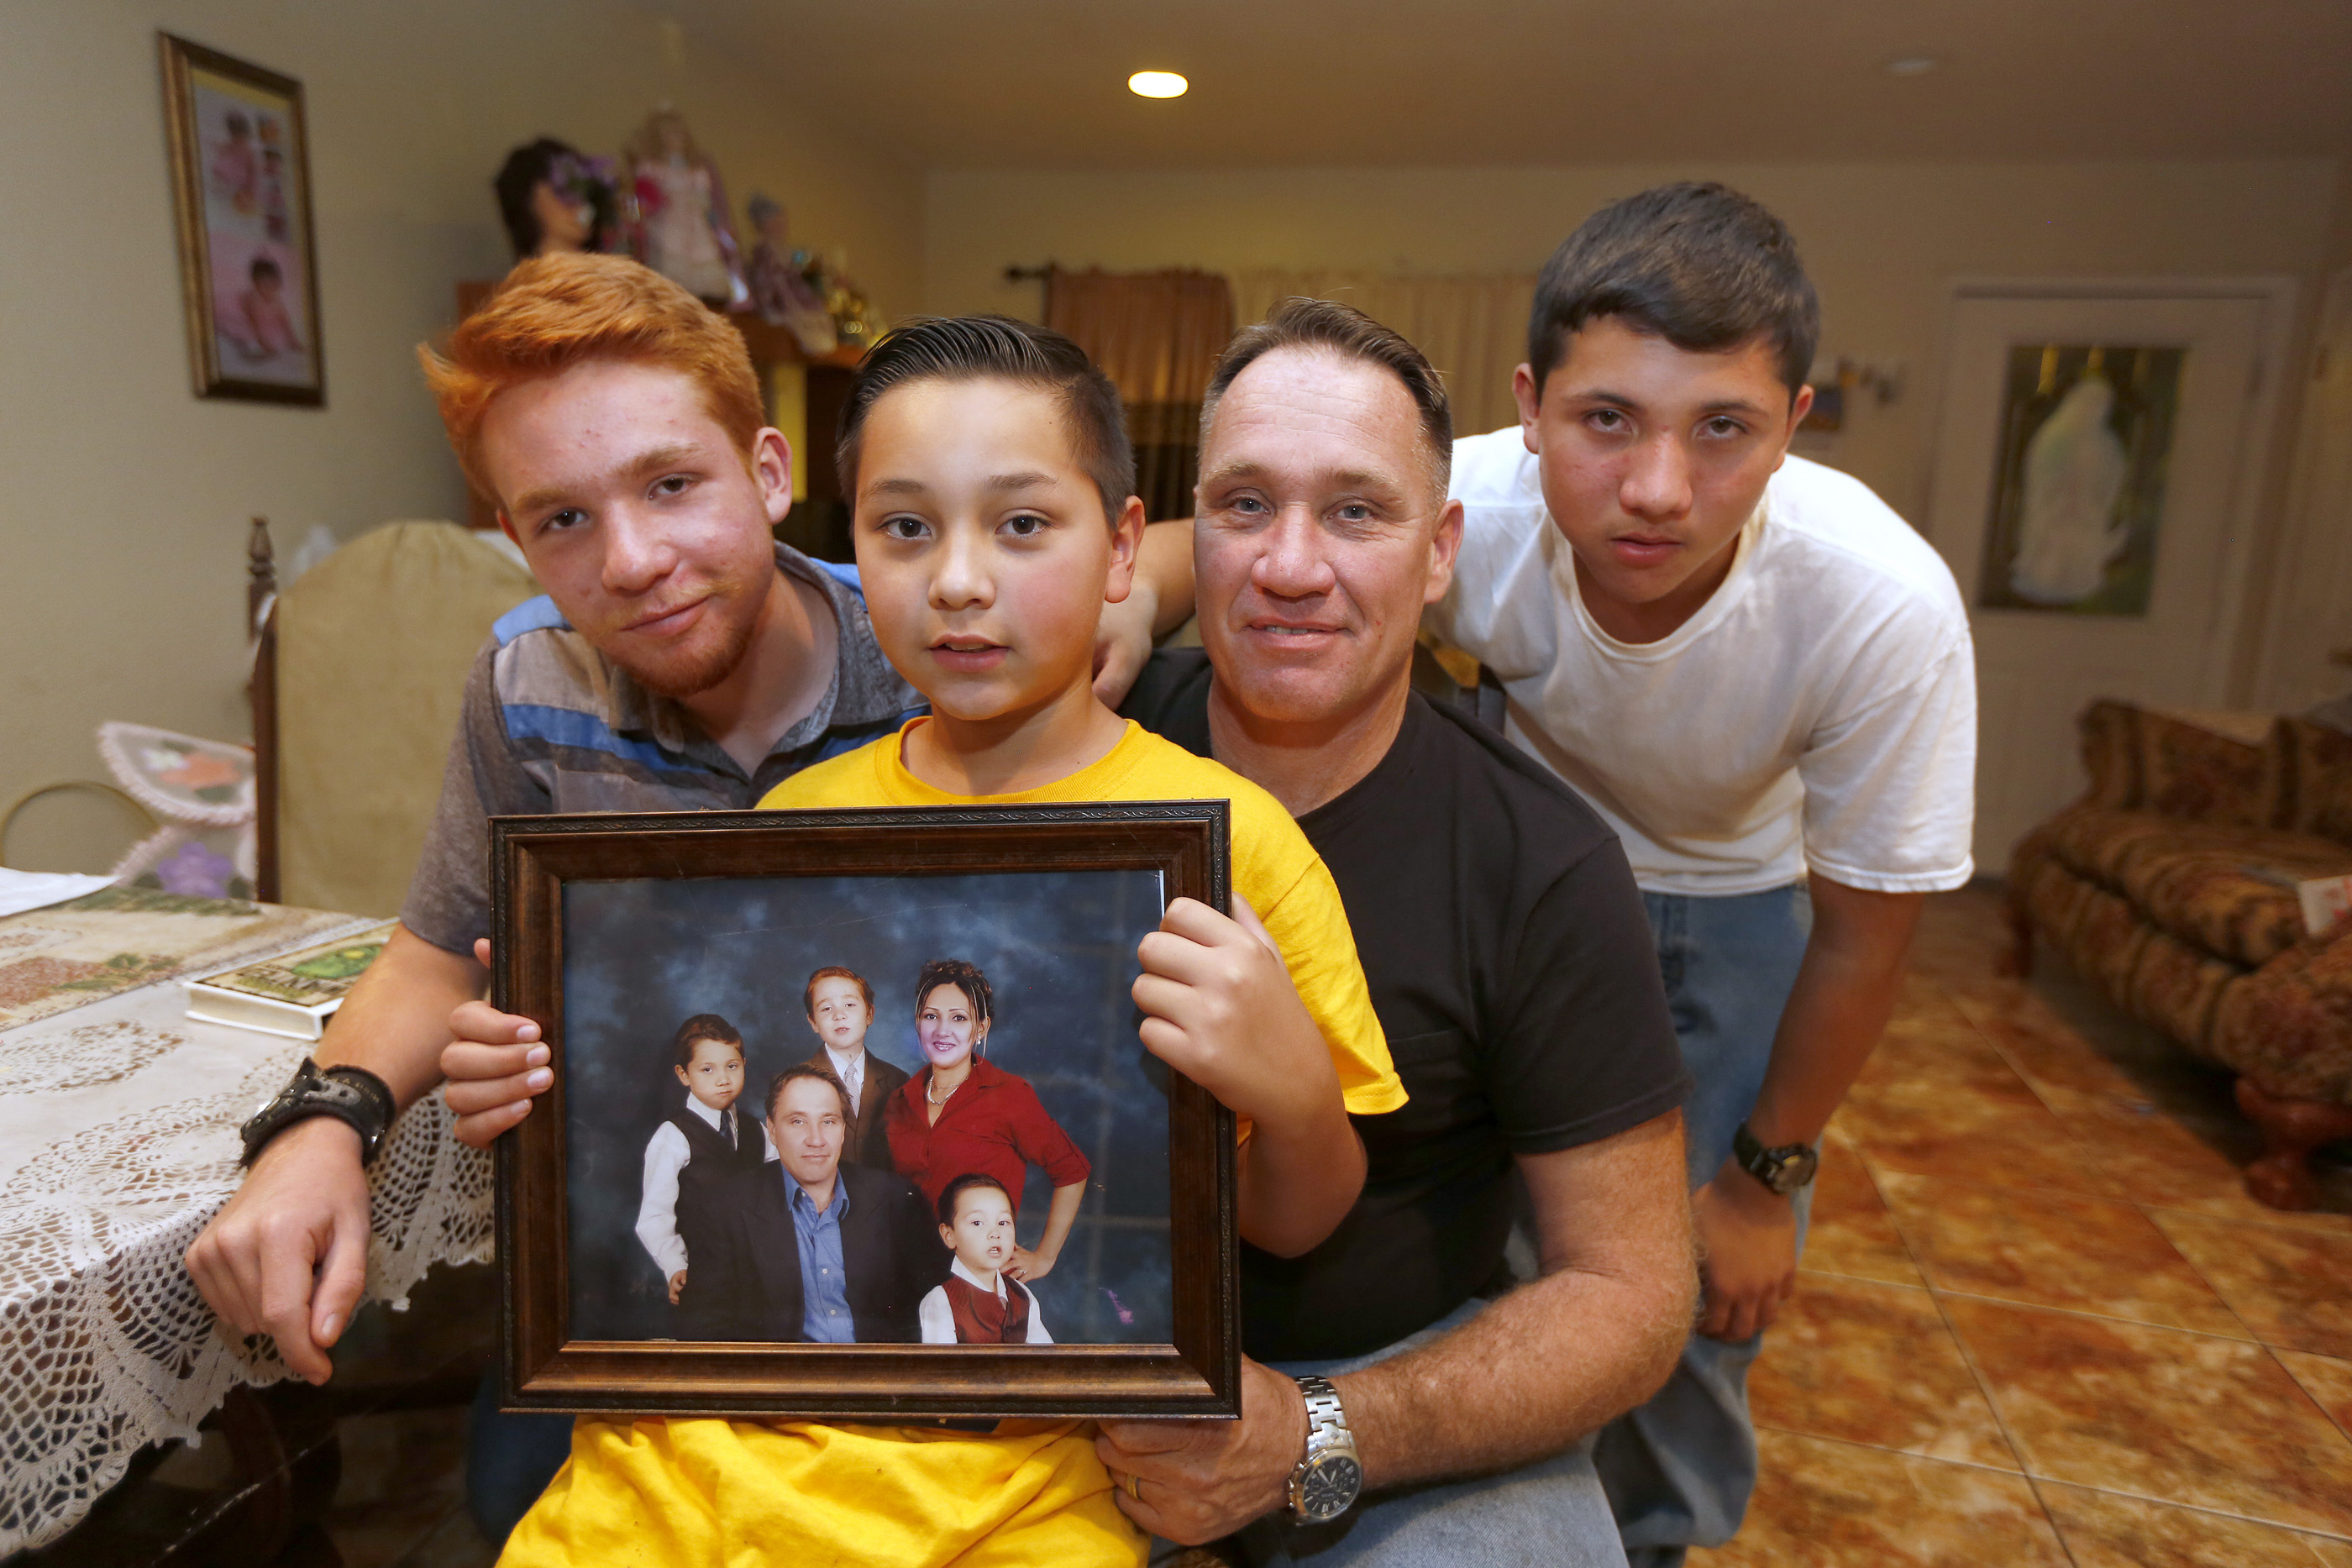 12/08/16/ VISTA / Alone in Vista California, Michael Paulsen with his children, Michael Alexander, Ryan Maximilllian and Brannon Liam hoping to be reunited with his wife, Emma Sanchez, who was deported ten year ago. Emma Sanchez, has been separated from her children for ten years when she was deported to Tijuana, Mexico. (Photo Aurelia Ventura/ La Opinion)